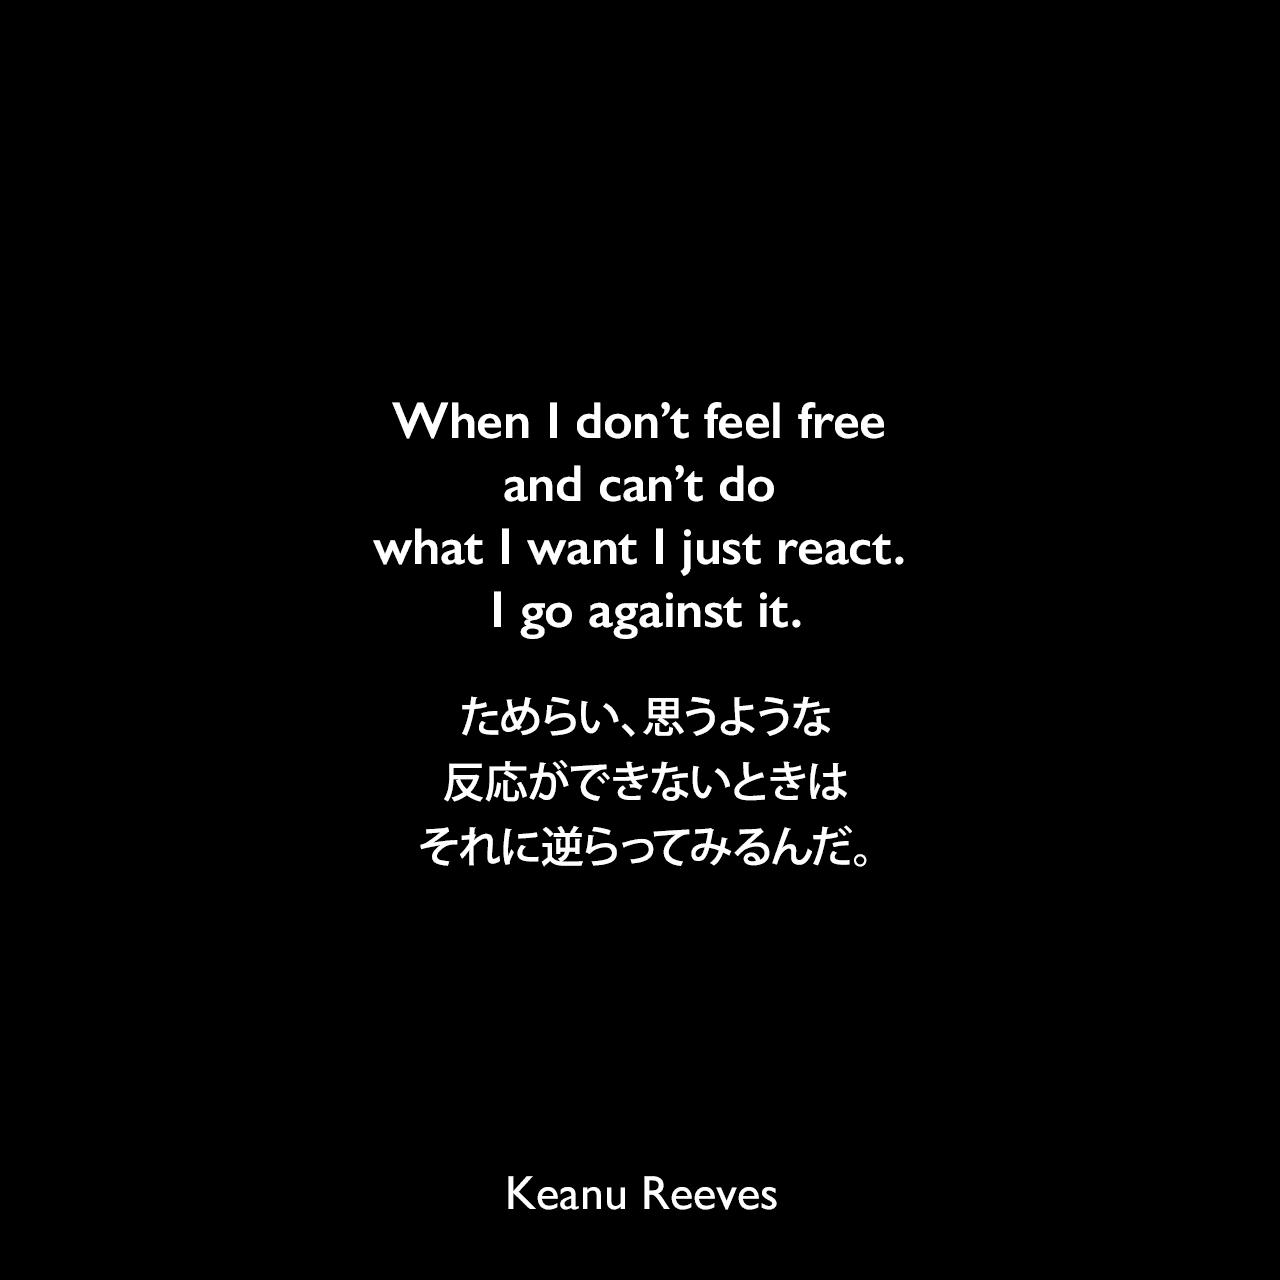 When I don’t feel free and can’t do what I want I just react. I go against it.ためらい、思うような反応ができないときは、それに逆らってみるんだ。Keanu Reeves